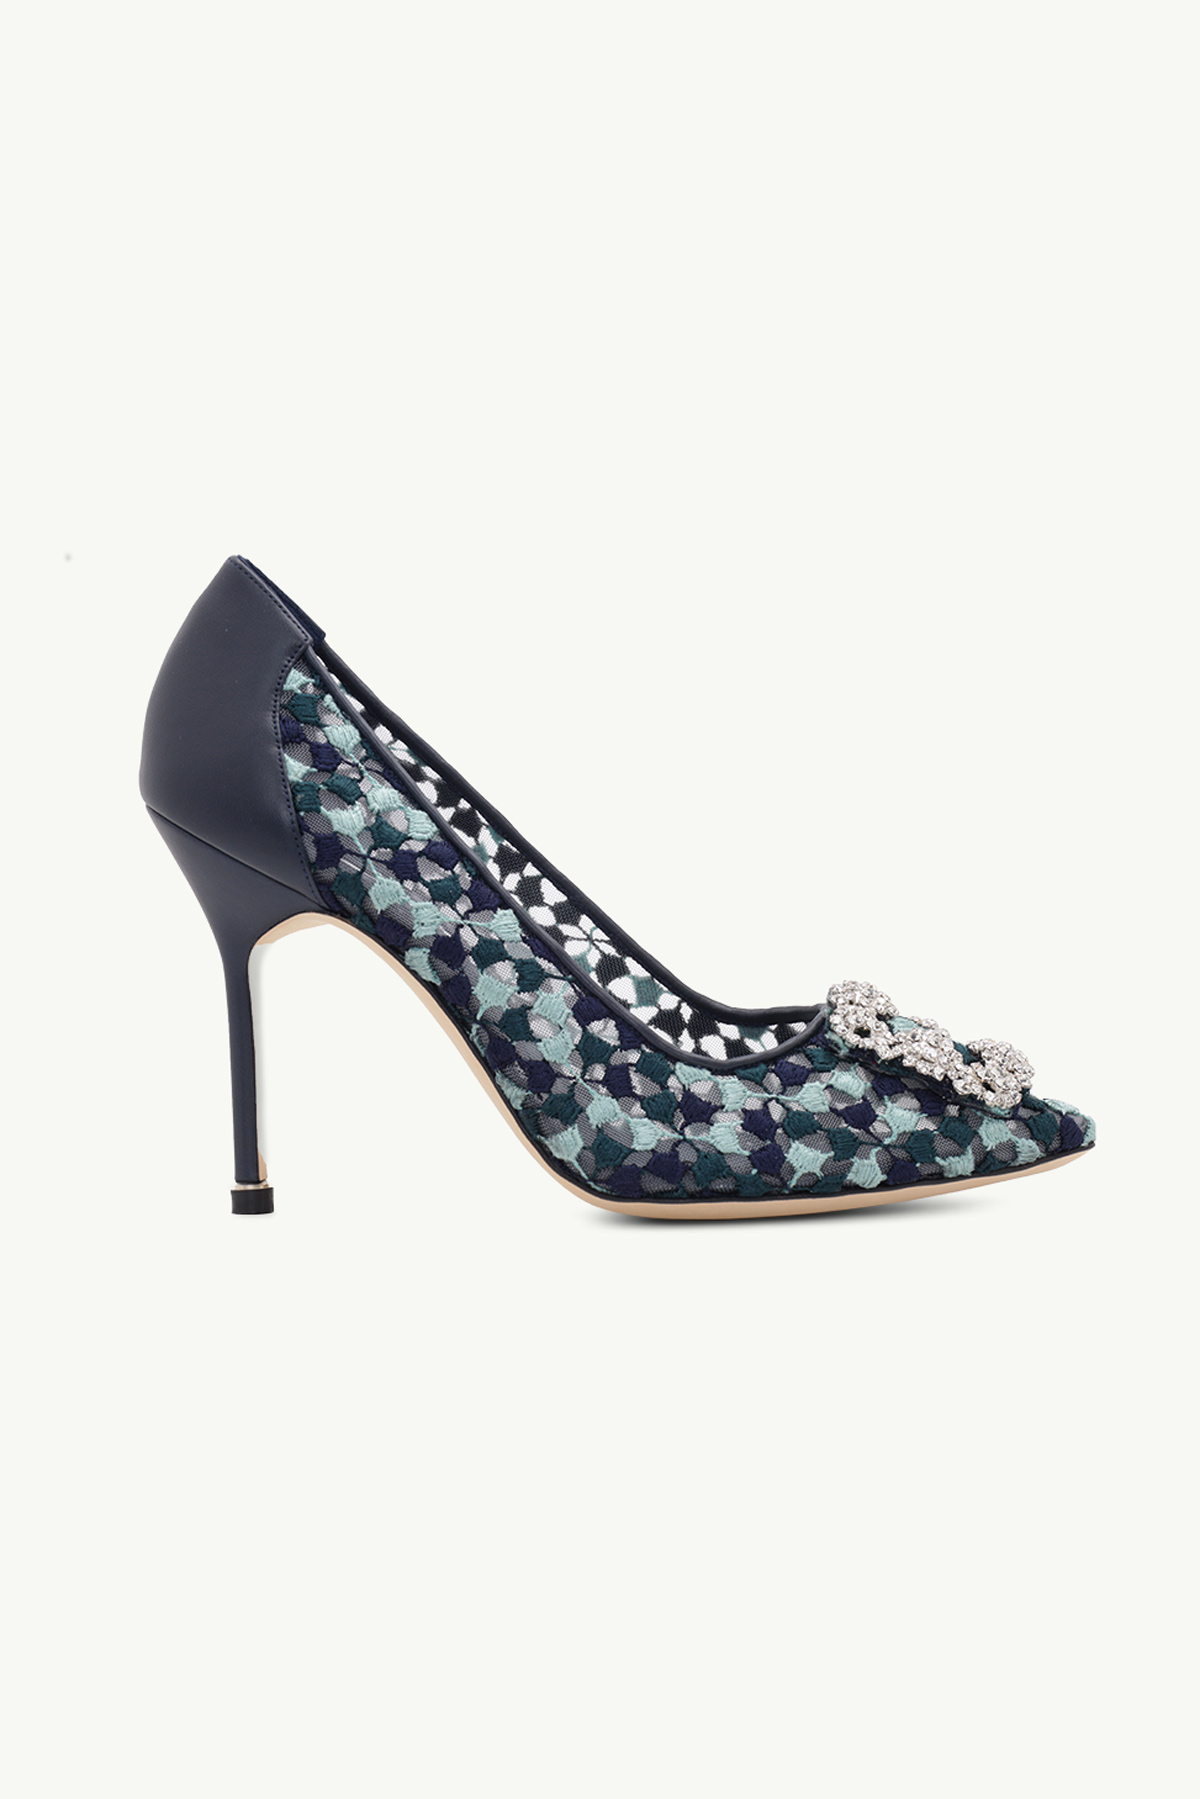 MANOLO BLAHNIK Hangisi Floral Embroidery 10.5cm Pumps in Navy/Turquoise Lace x Nappa with White Crystal 0